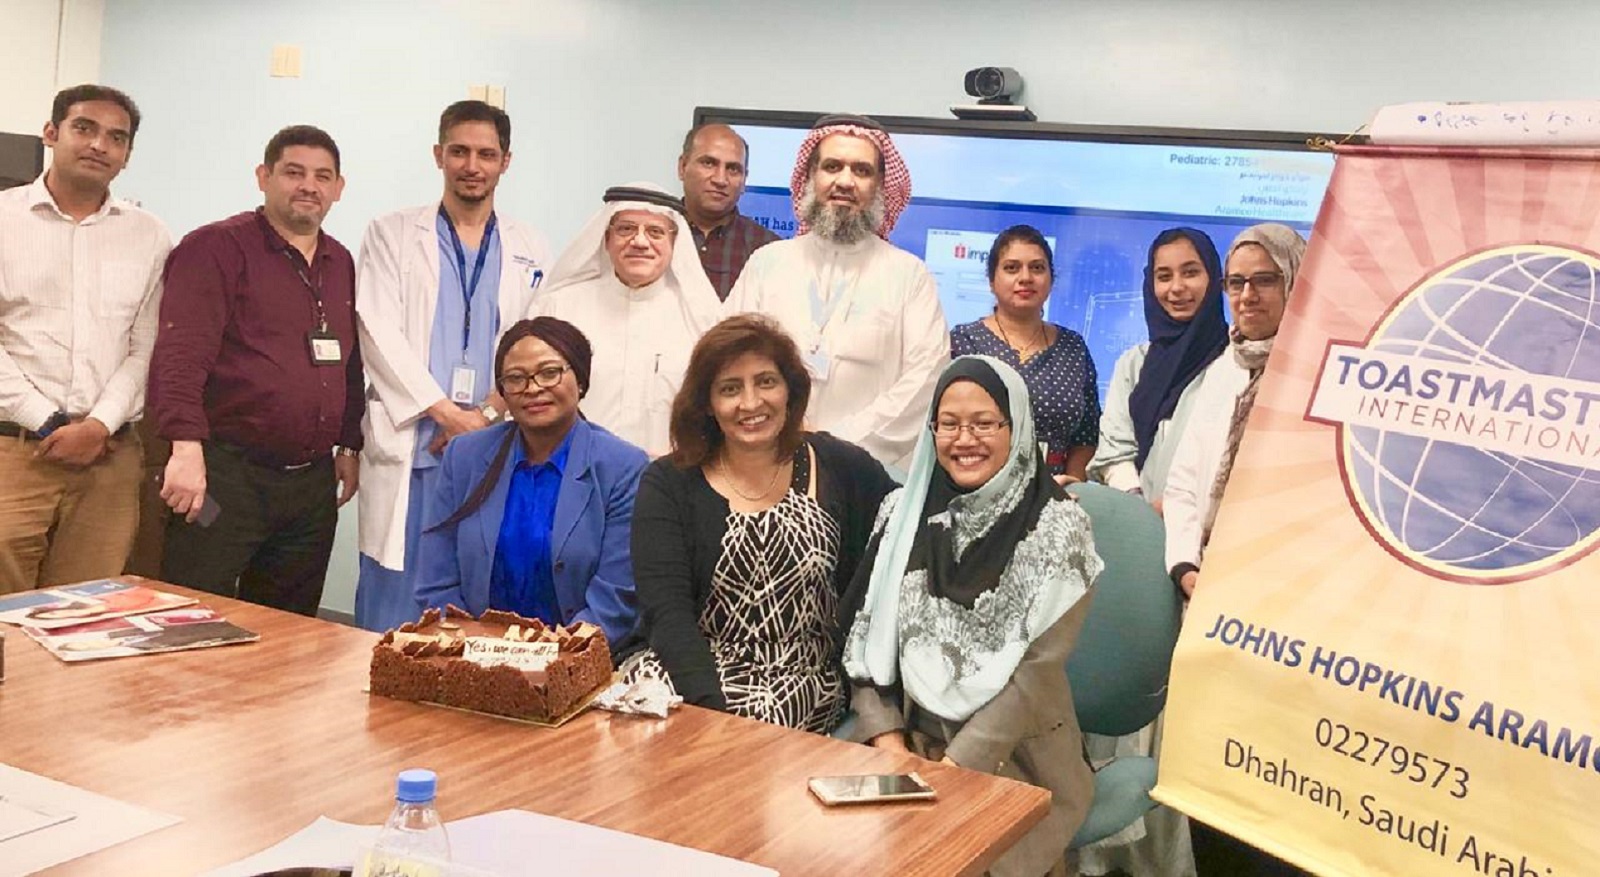 Members of the Johns Hopkins Aramco Healthcare club in Dhahran, Saudi Arabia, gather together for a club photo.